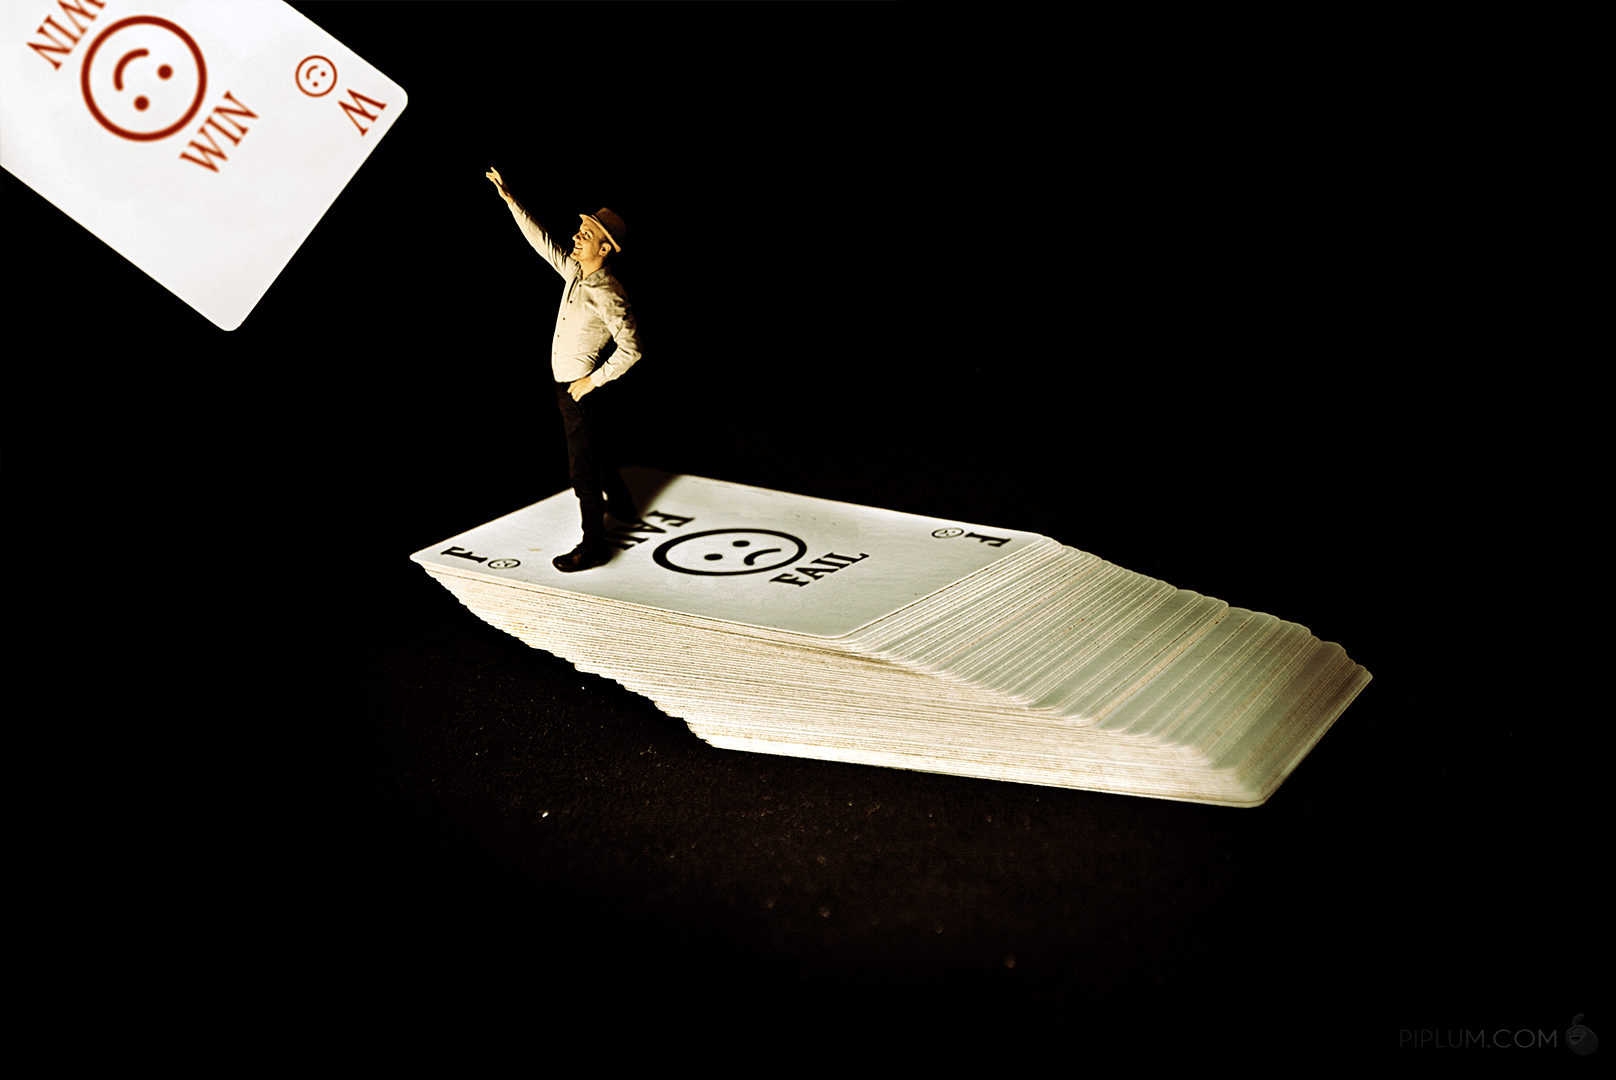 Motivational-Quote-Man-trying-to-pick-a-lucky-card-after-many-fails-surreal-miniature-photography-photo-manipulation